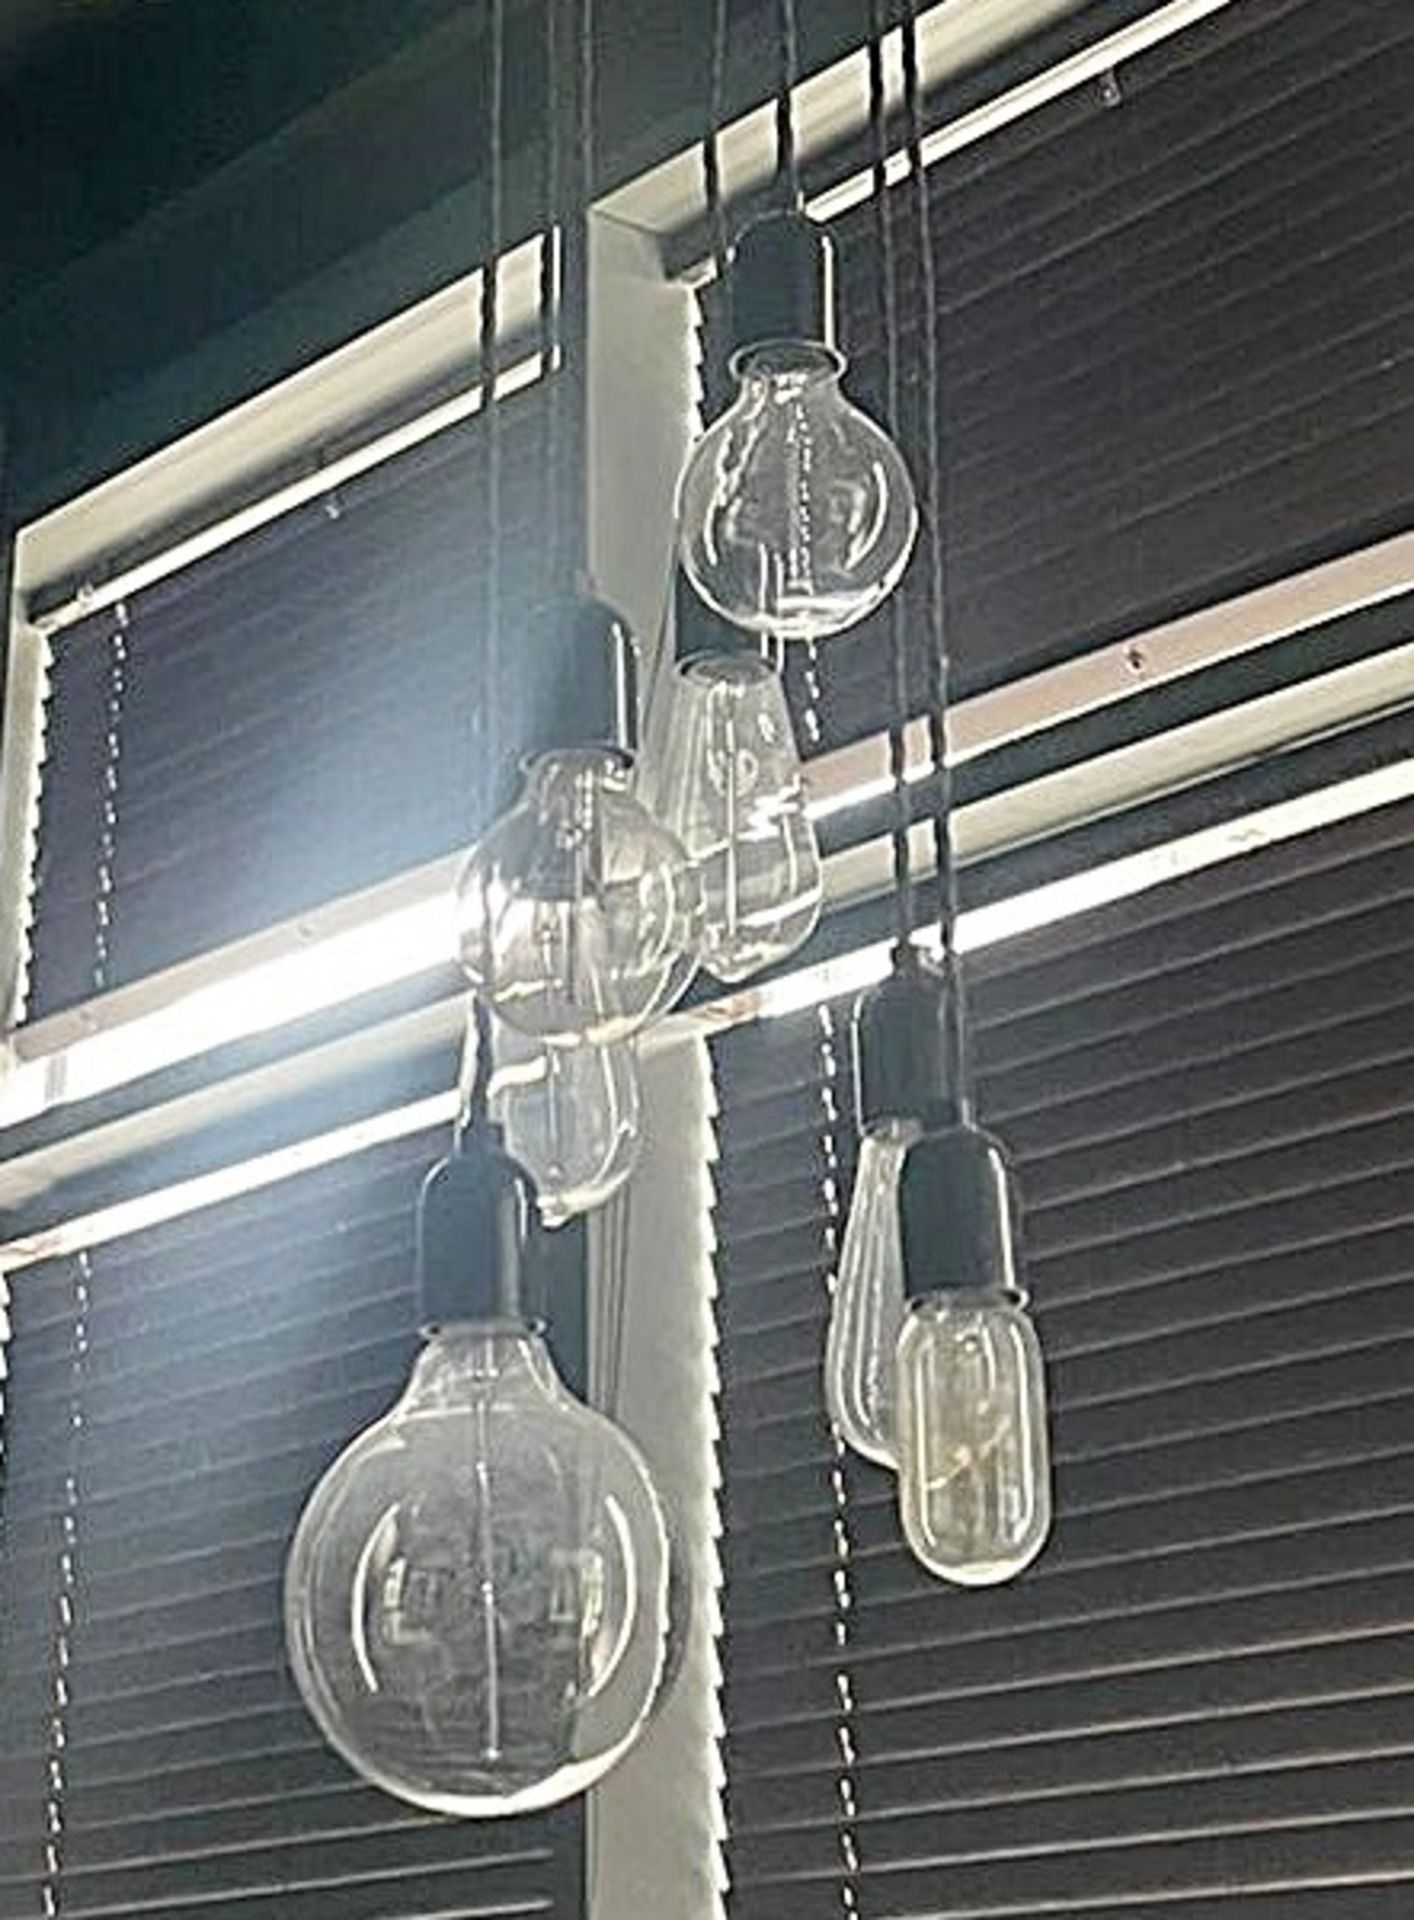 3 x Sets of Suspended Cluster Lights - CL674 - Location: Telford, TF3Collections:This item is to